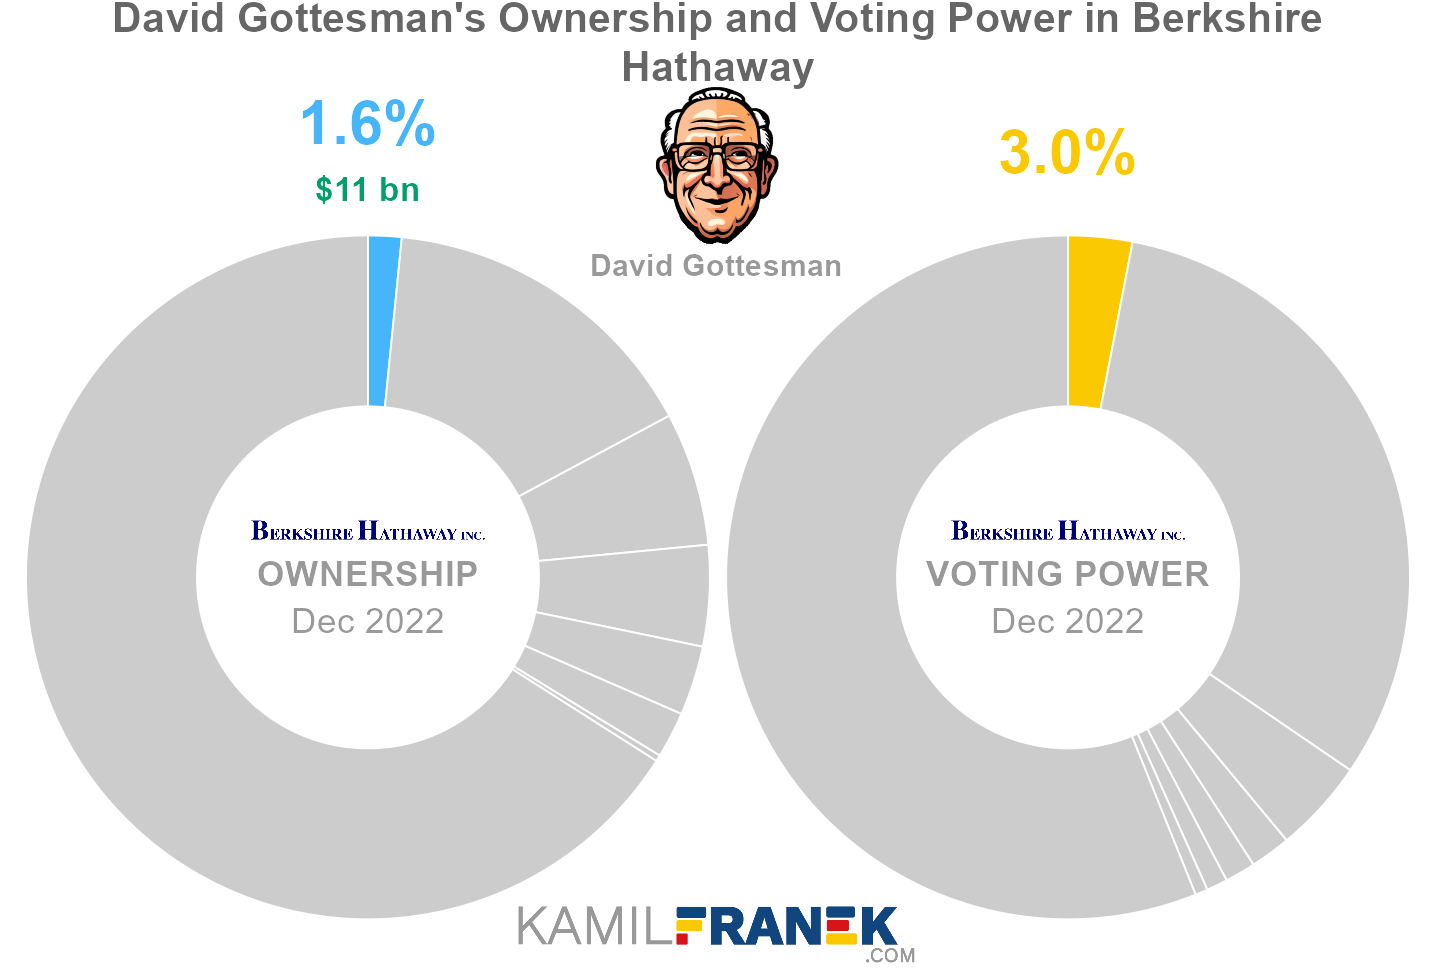 David Gottesman's share ownership and voting power in Berkshire Hathaway (chart)